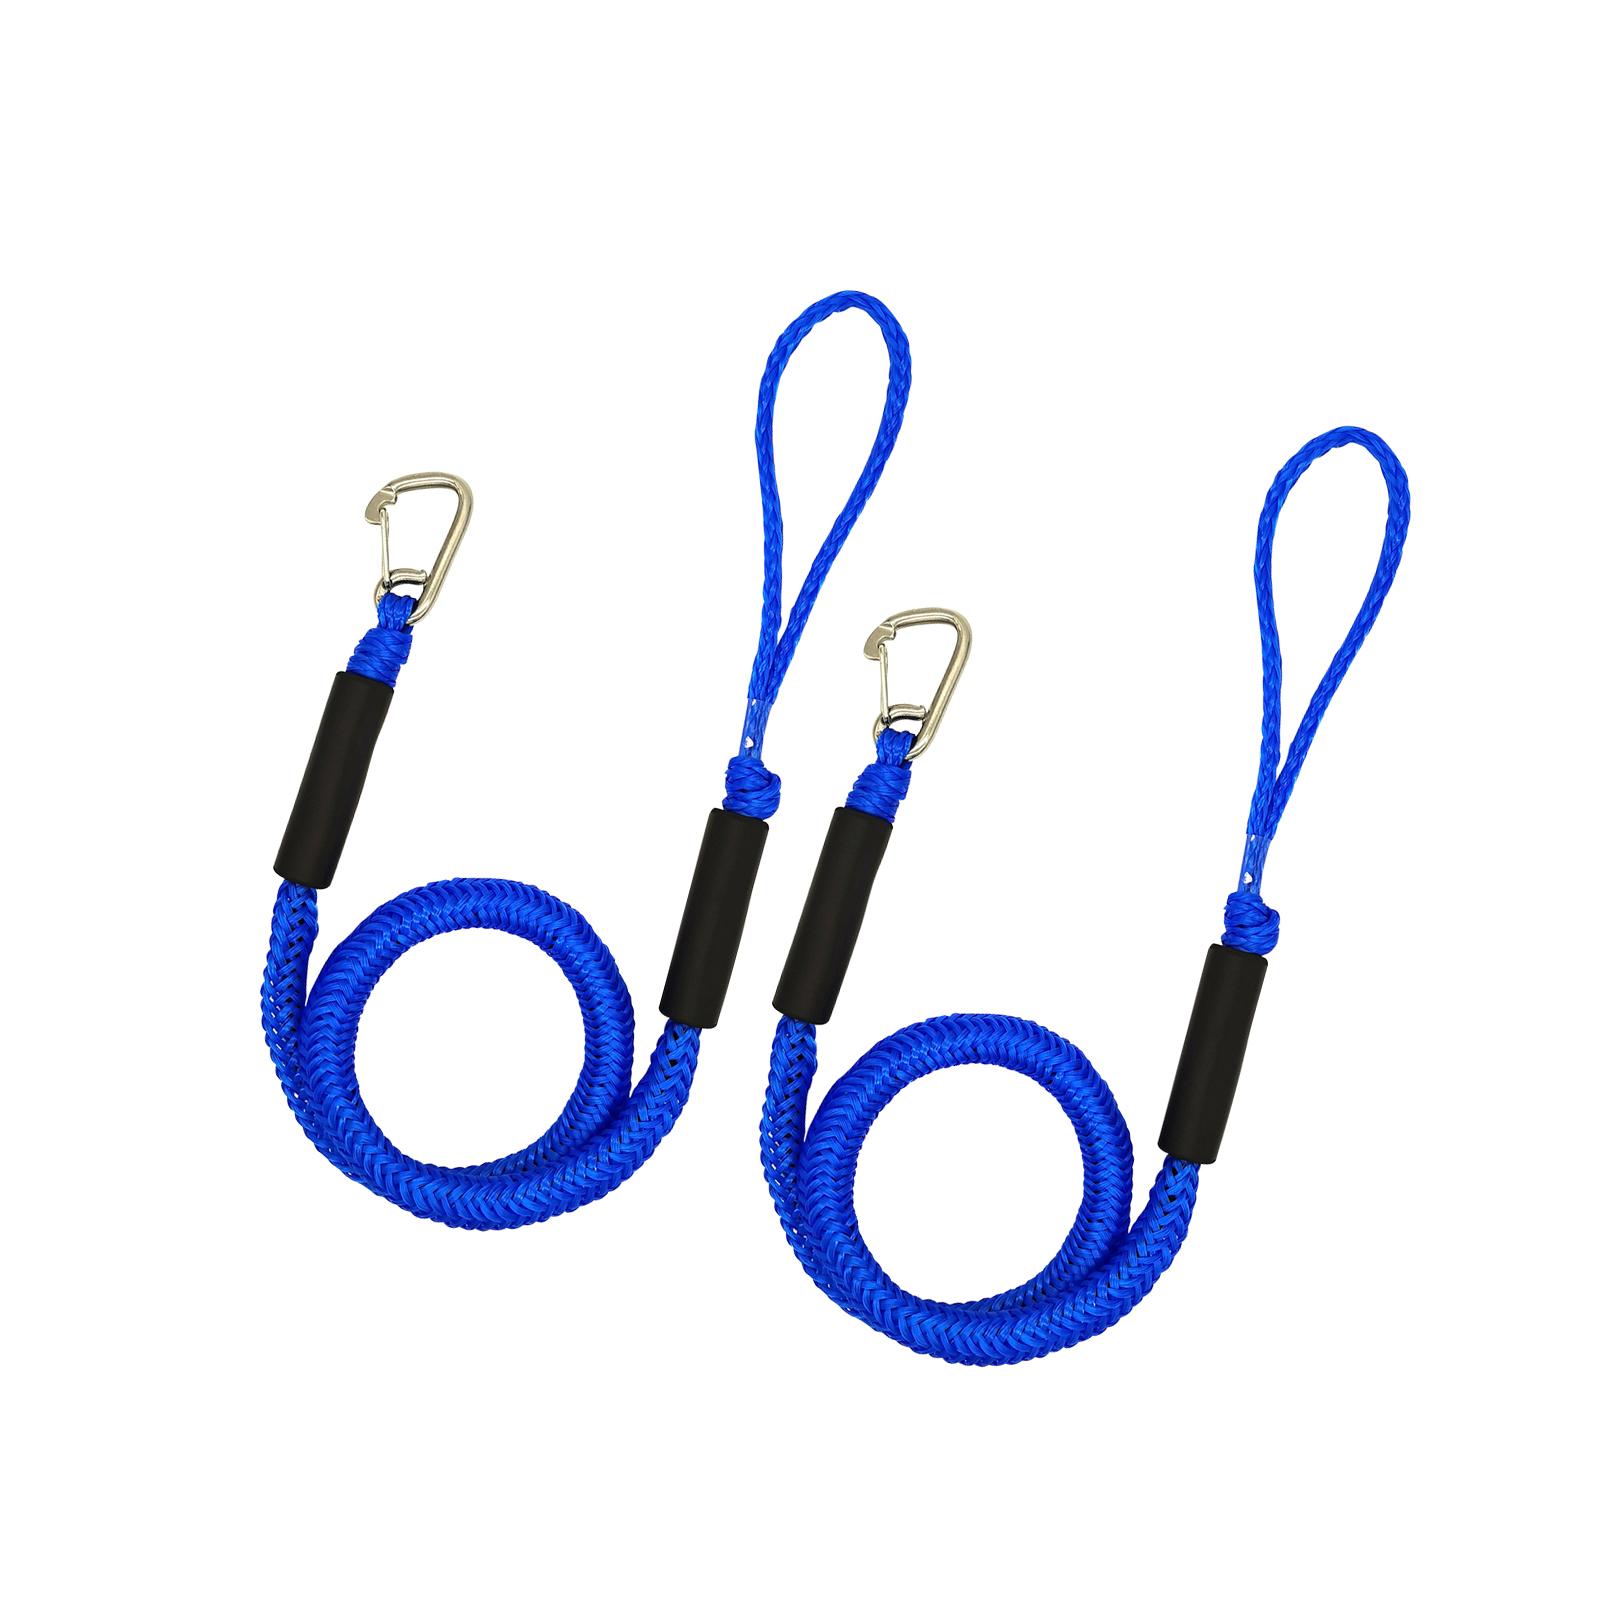 2Pcs Boat Bungee Dock Line with Loop Boat Ropes for Docking Marine Dock Line blue